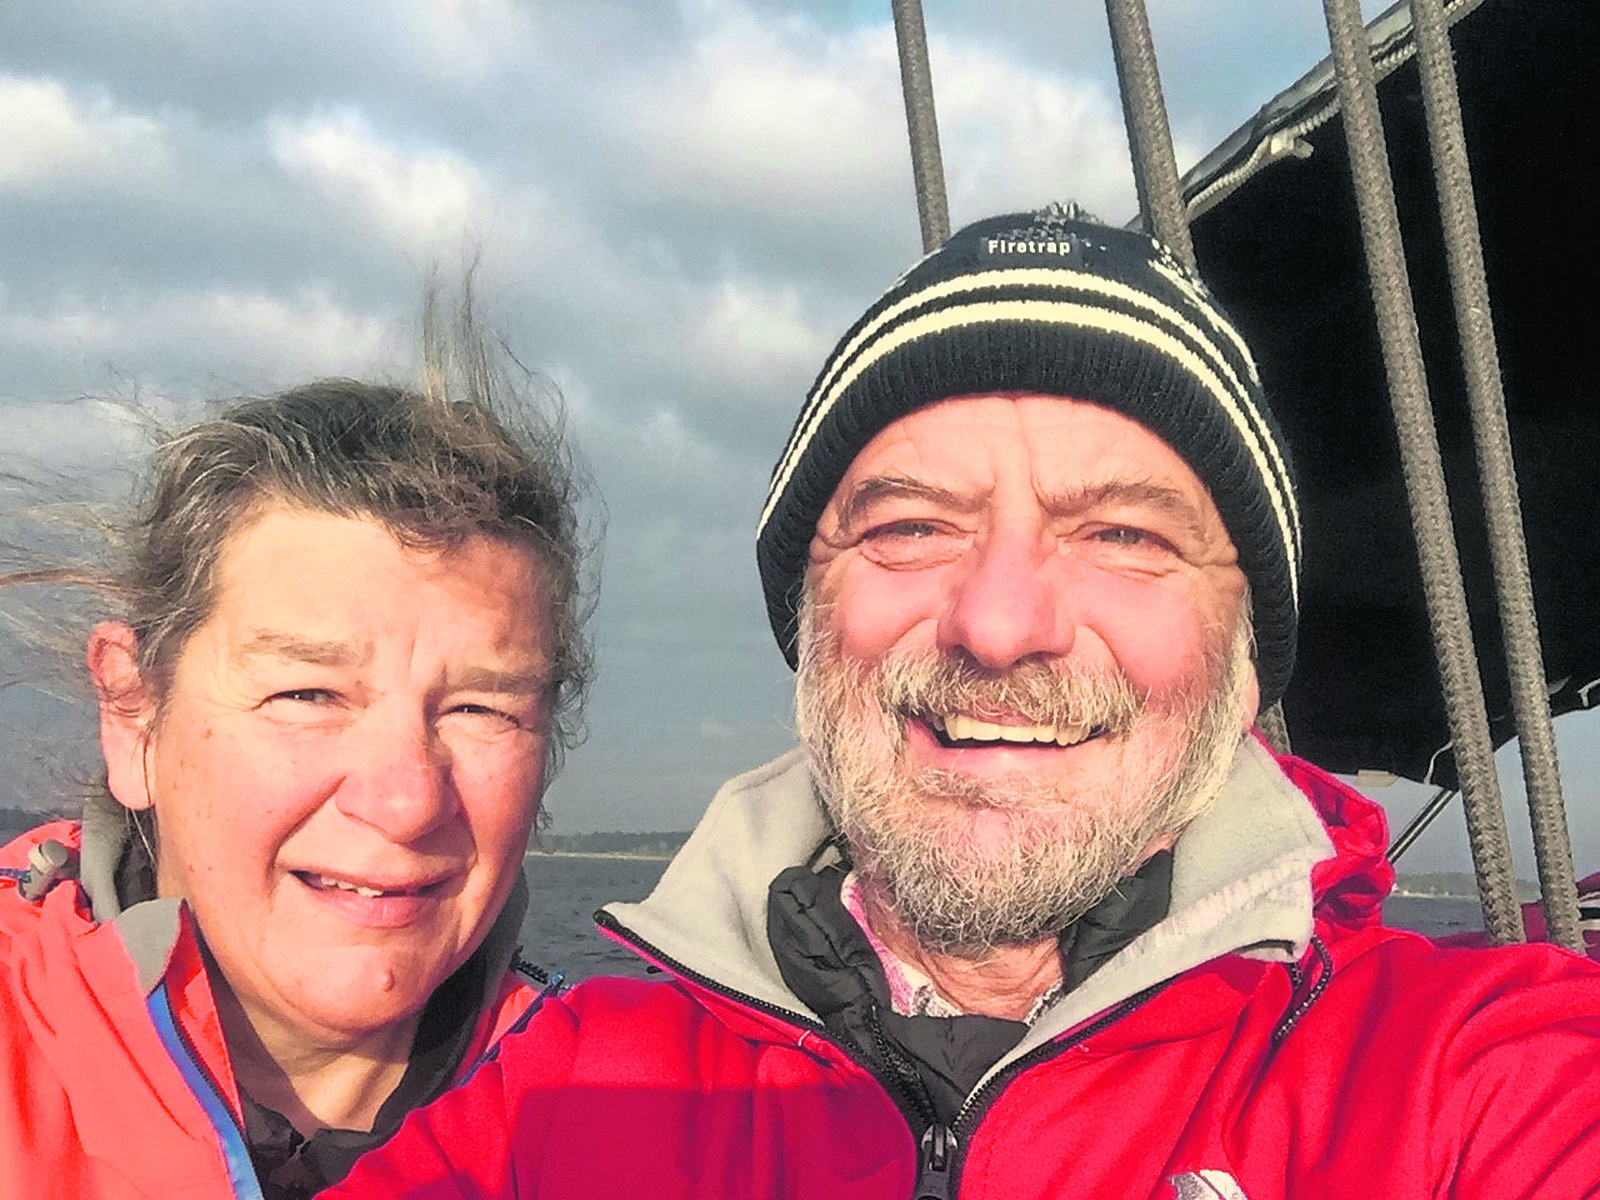 Elsie Downie and Lionel Sole set off on their sailing trip of a lifetime back in 2015